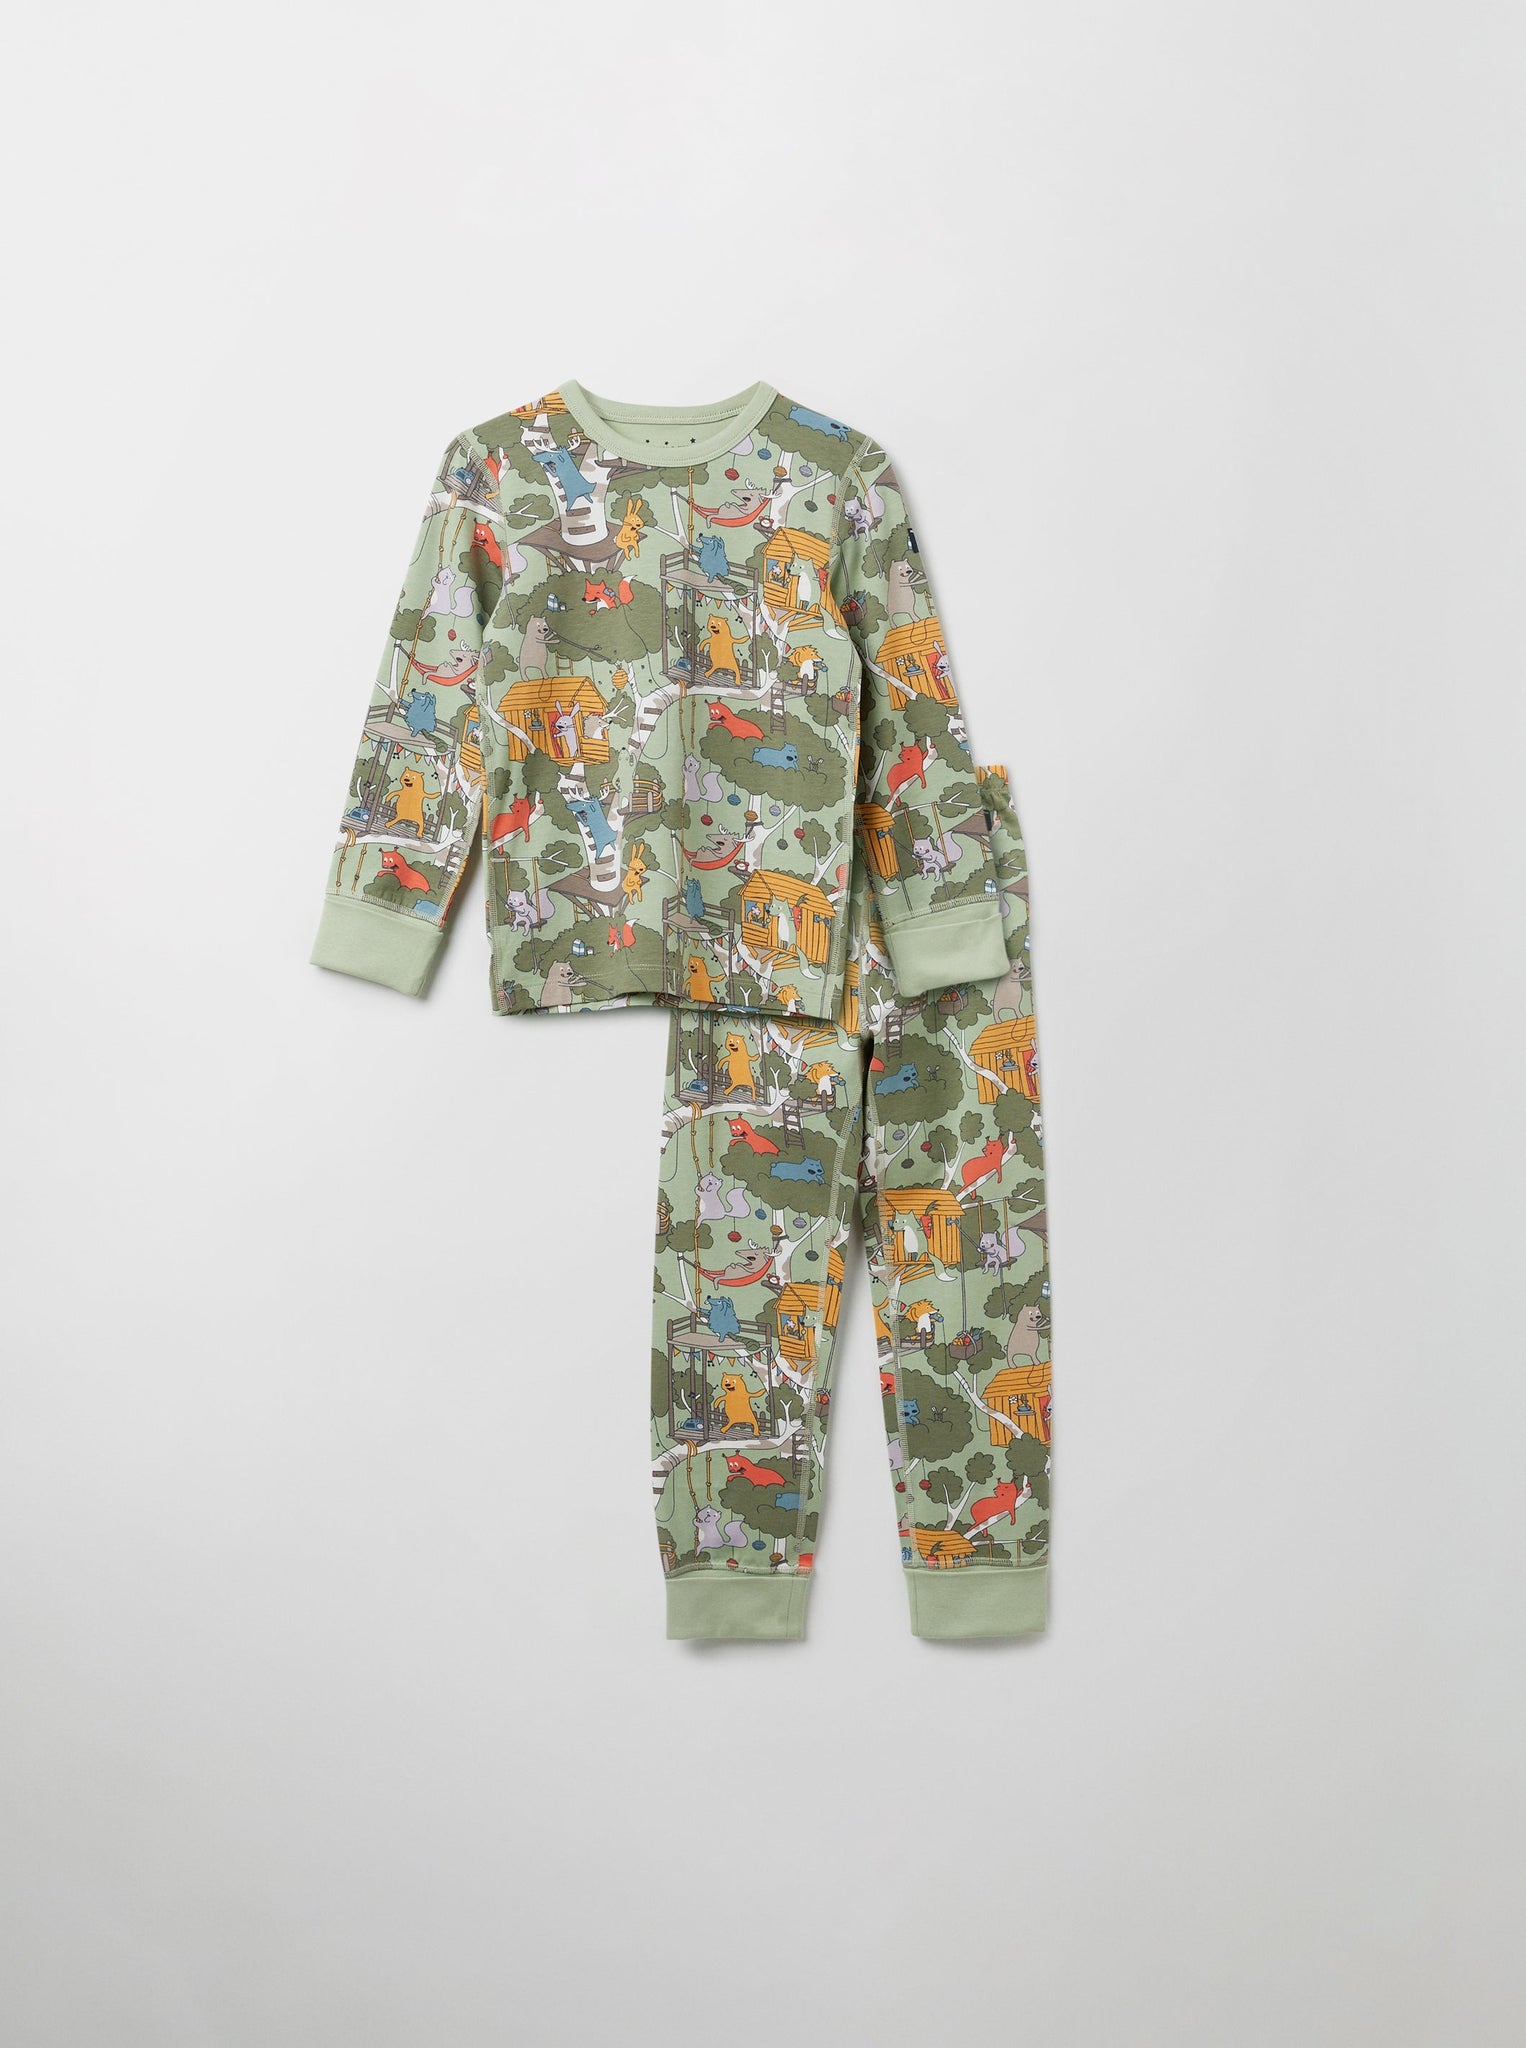 Organic Cotton Green Kids Pyjamas from the Polarn O. Pyret kidswear collection. Clothes made using sustainably sourced materials.